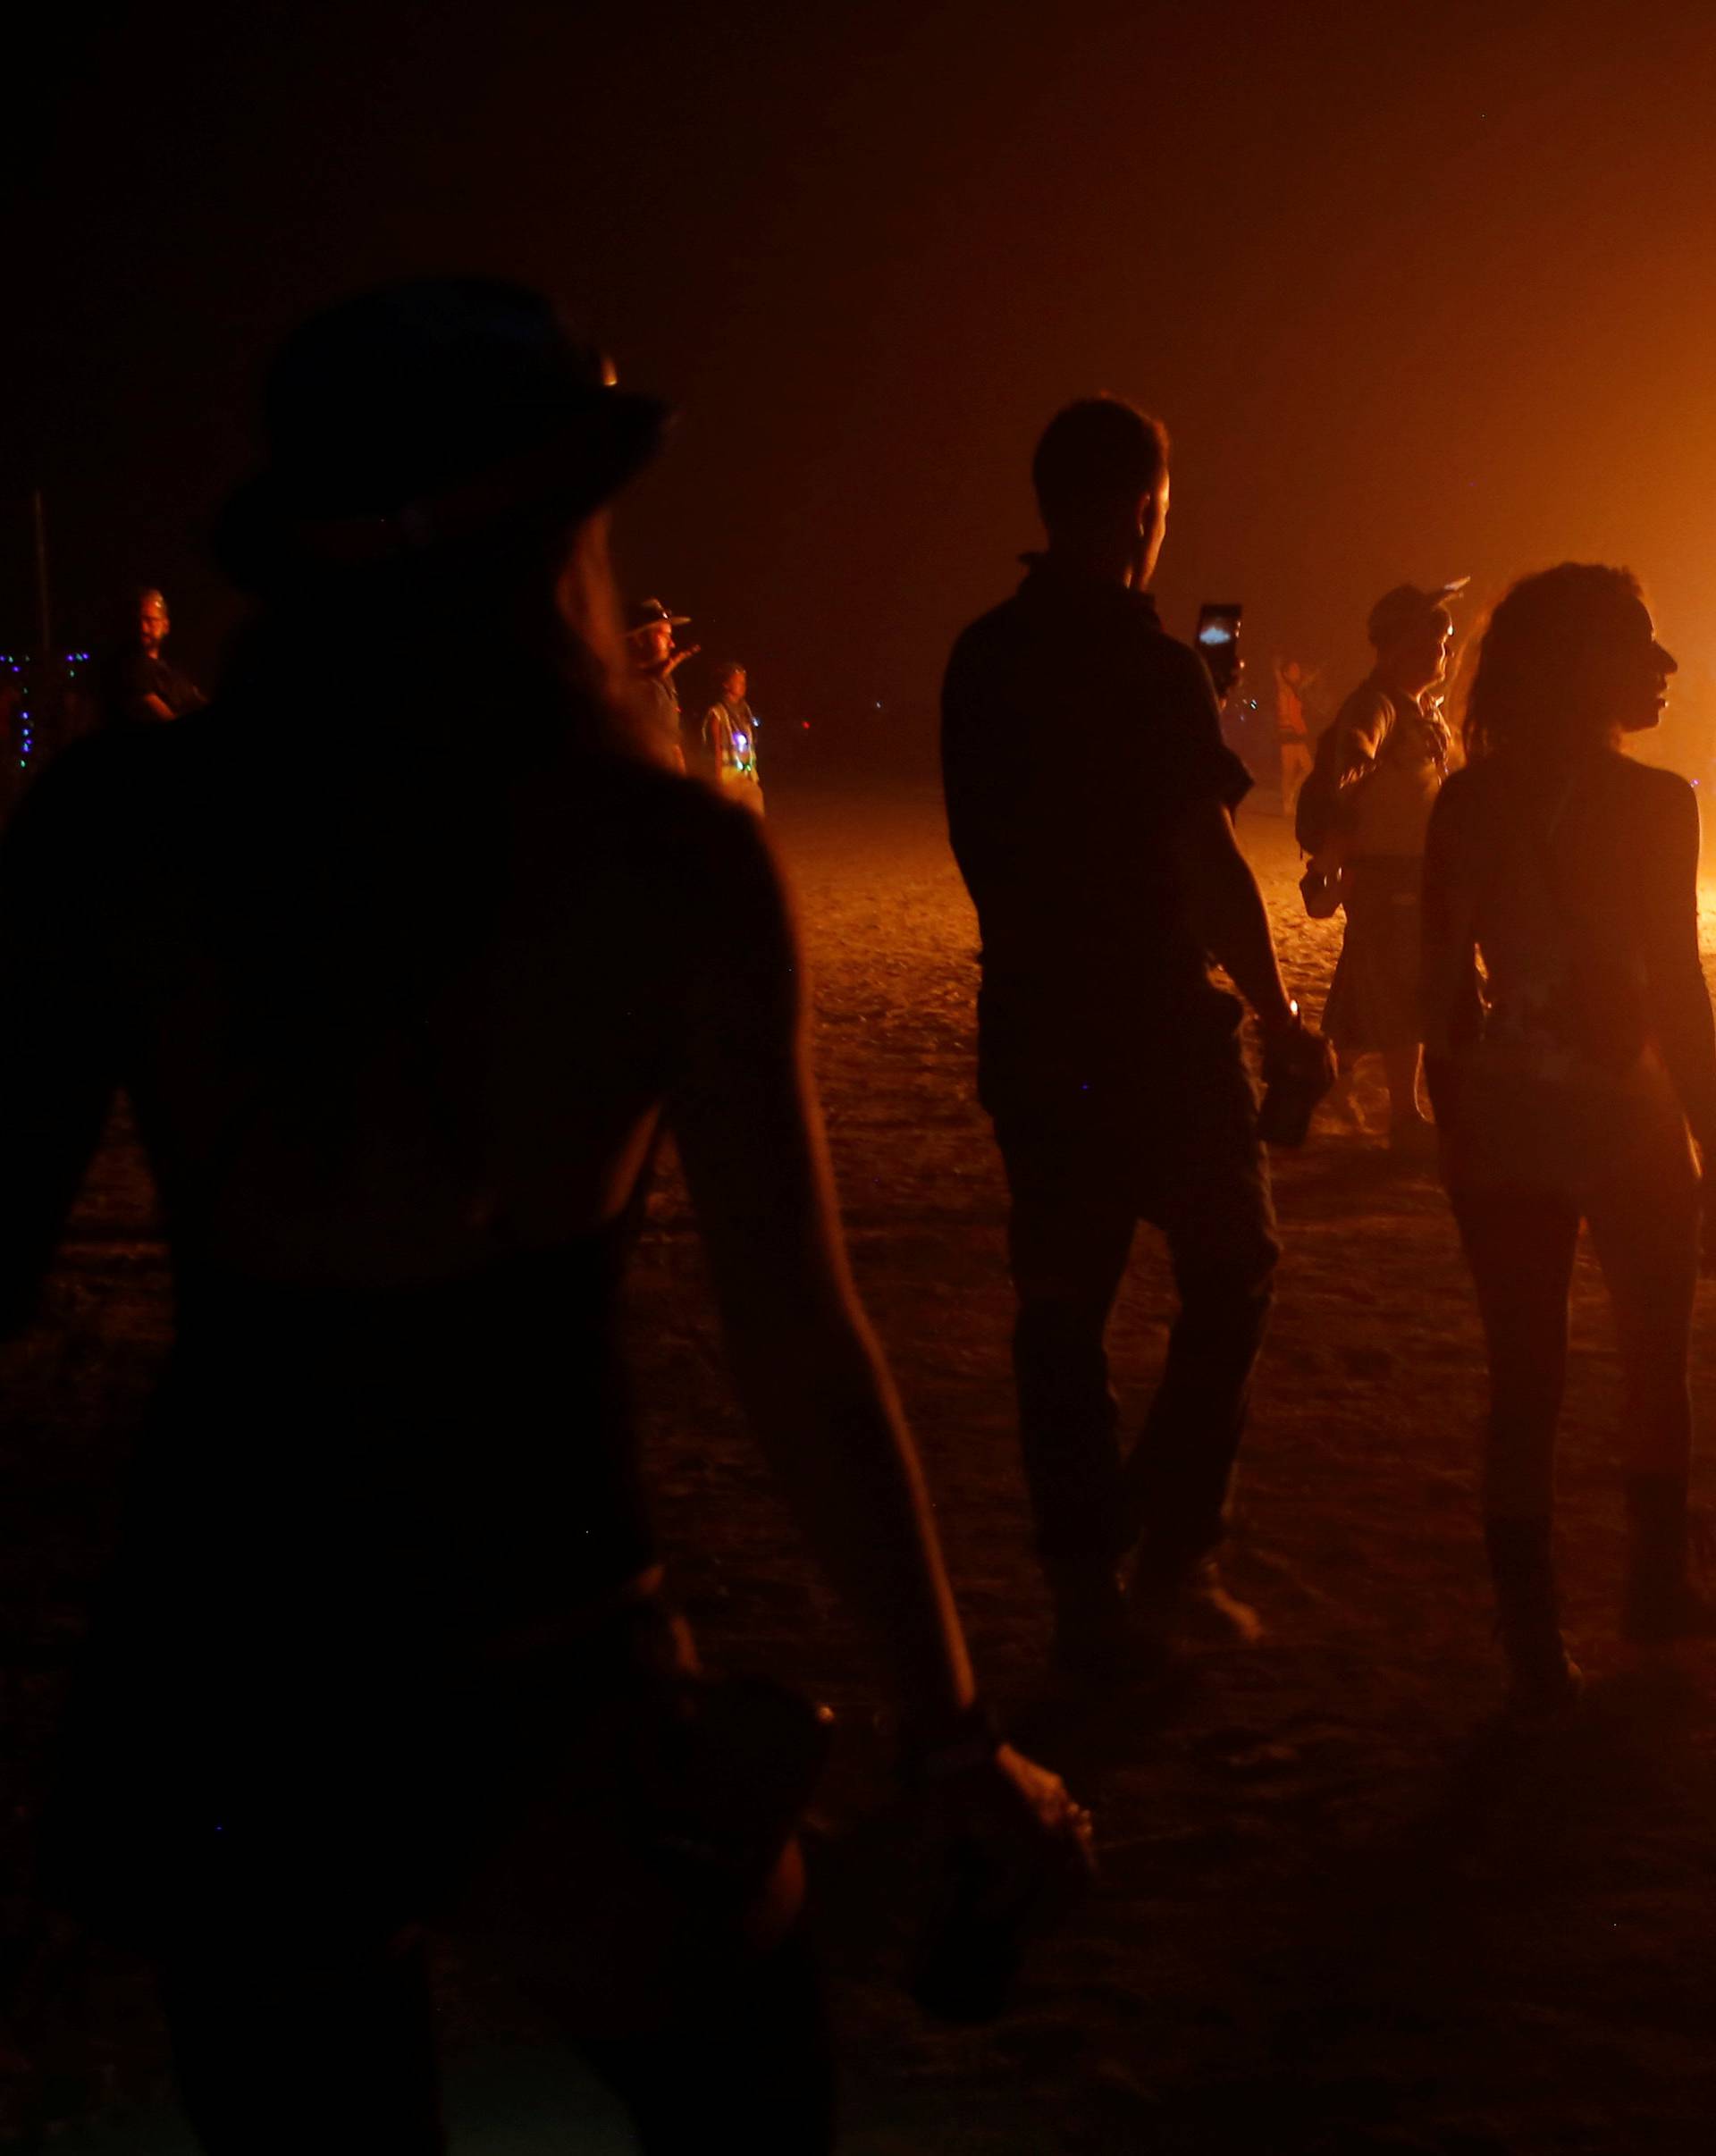 Participants approach a burning art installation as approximately 70,000 people from all over the world gathered for the annual Burning Man arts and music festival in the Black Rock Desert of Nevada